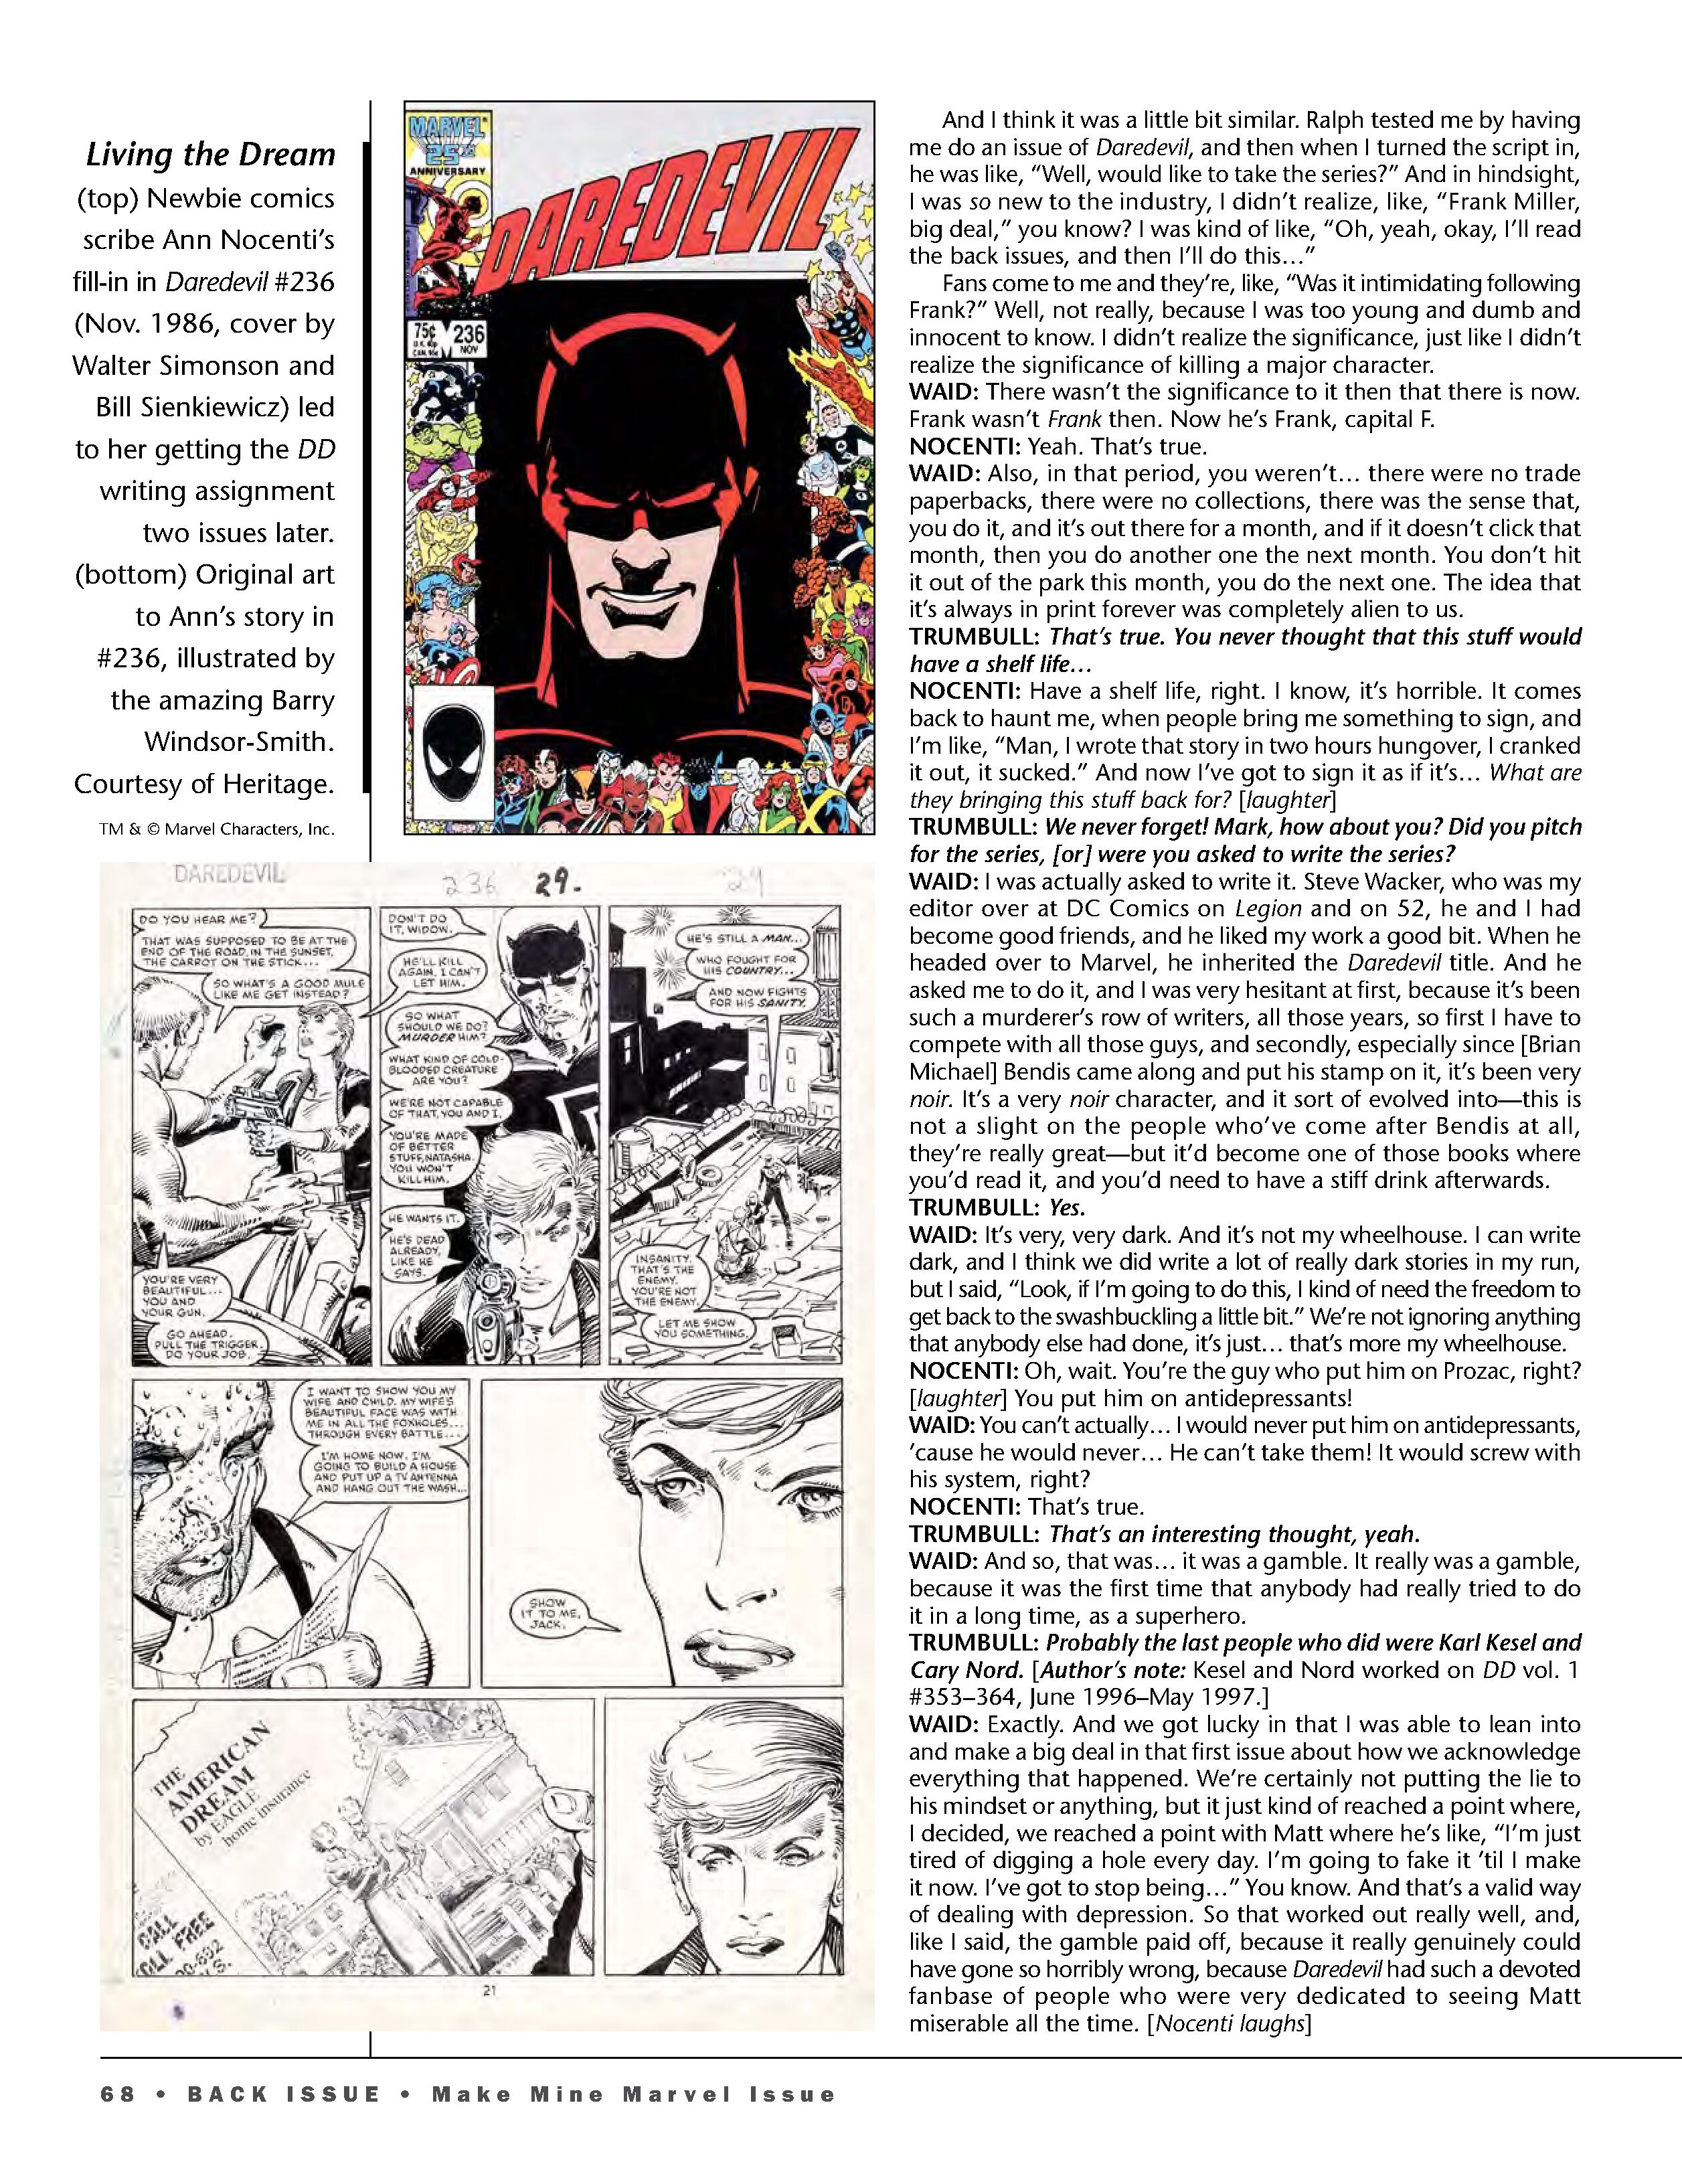 Read online Back Issue comic -  Issue #110 - 70